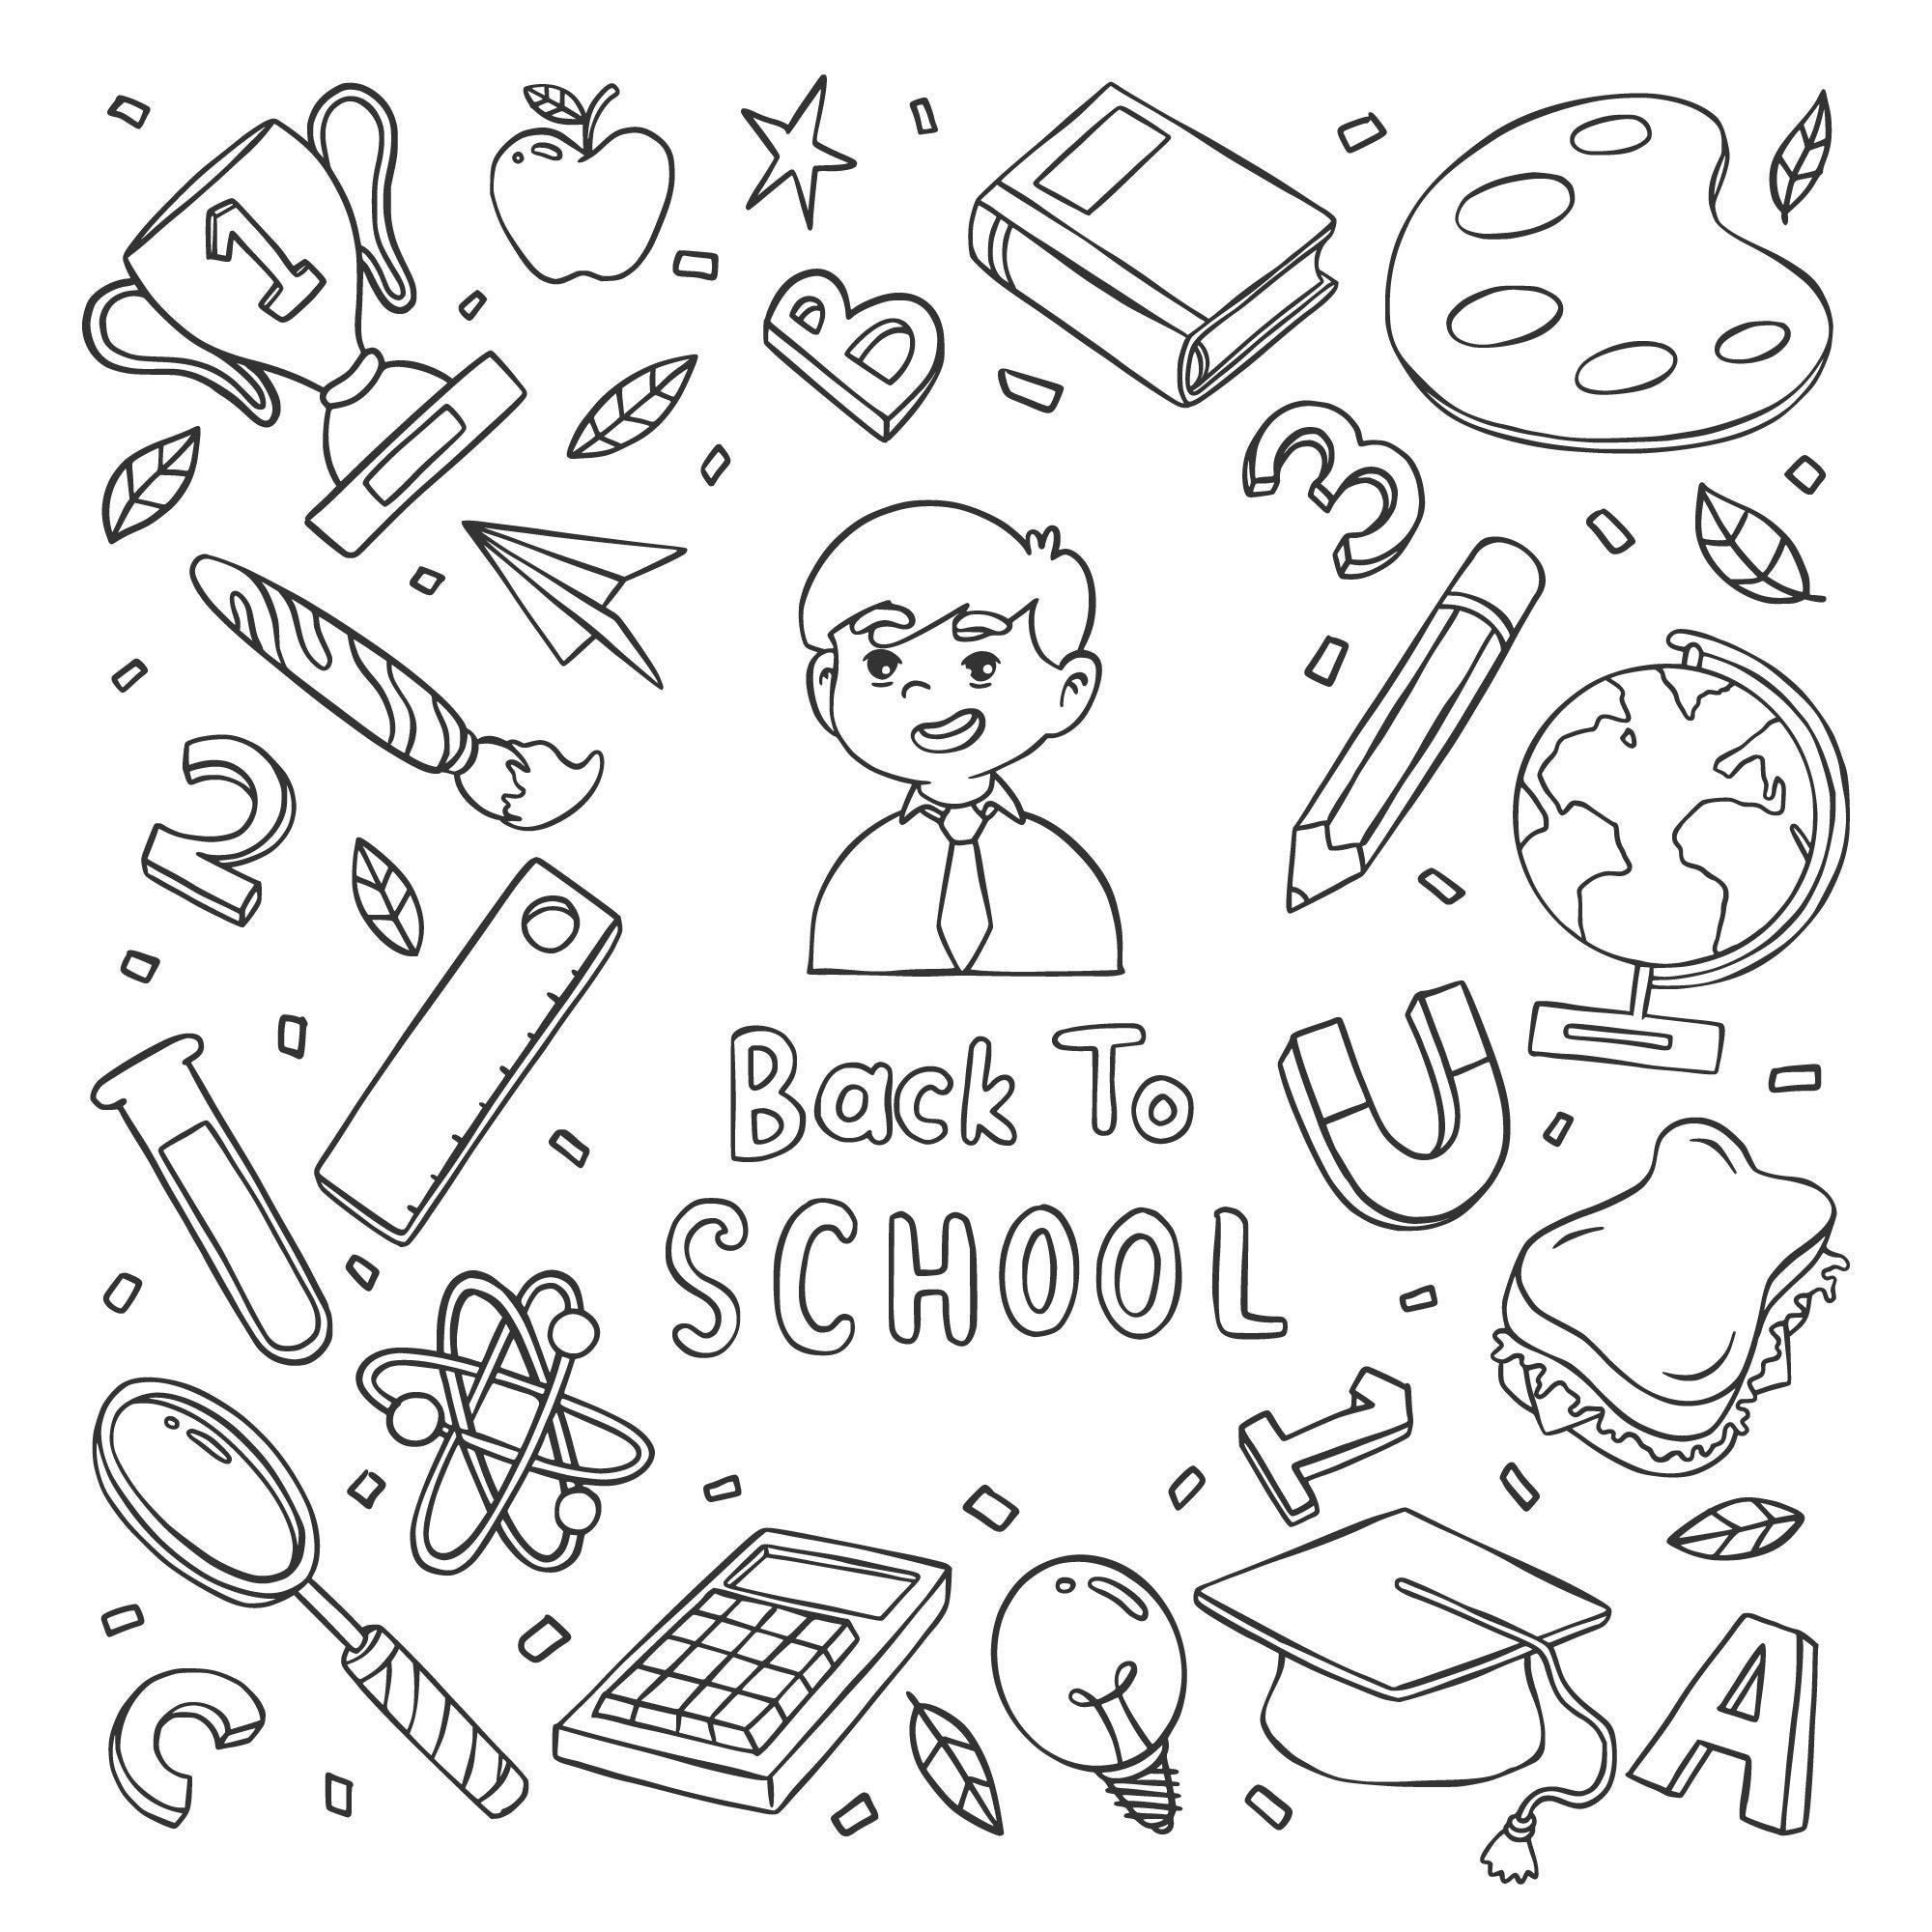 School Clipart Vector Doodle School Icons Symbols Hand Drawn Stadying Stock  Vector by ©9george 384466496